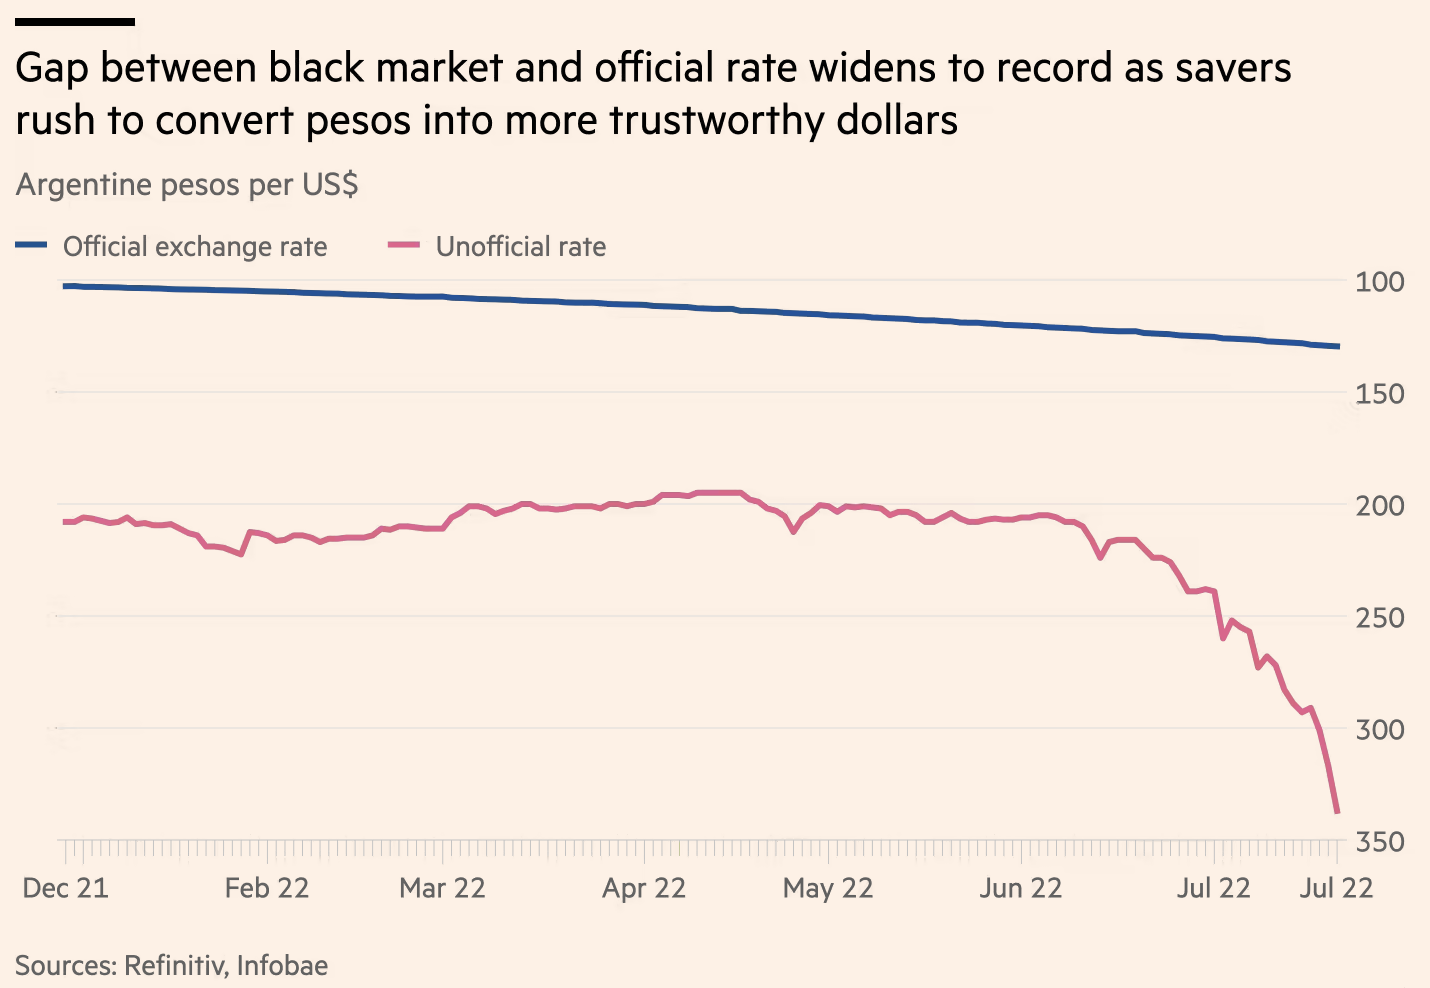 Gap between black market and official rate USD/ARS